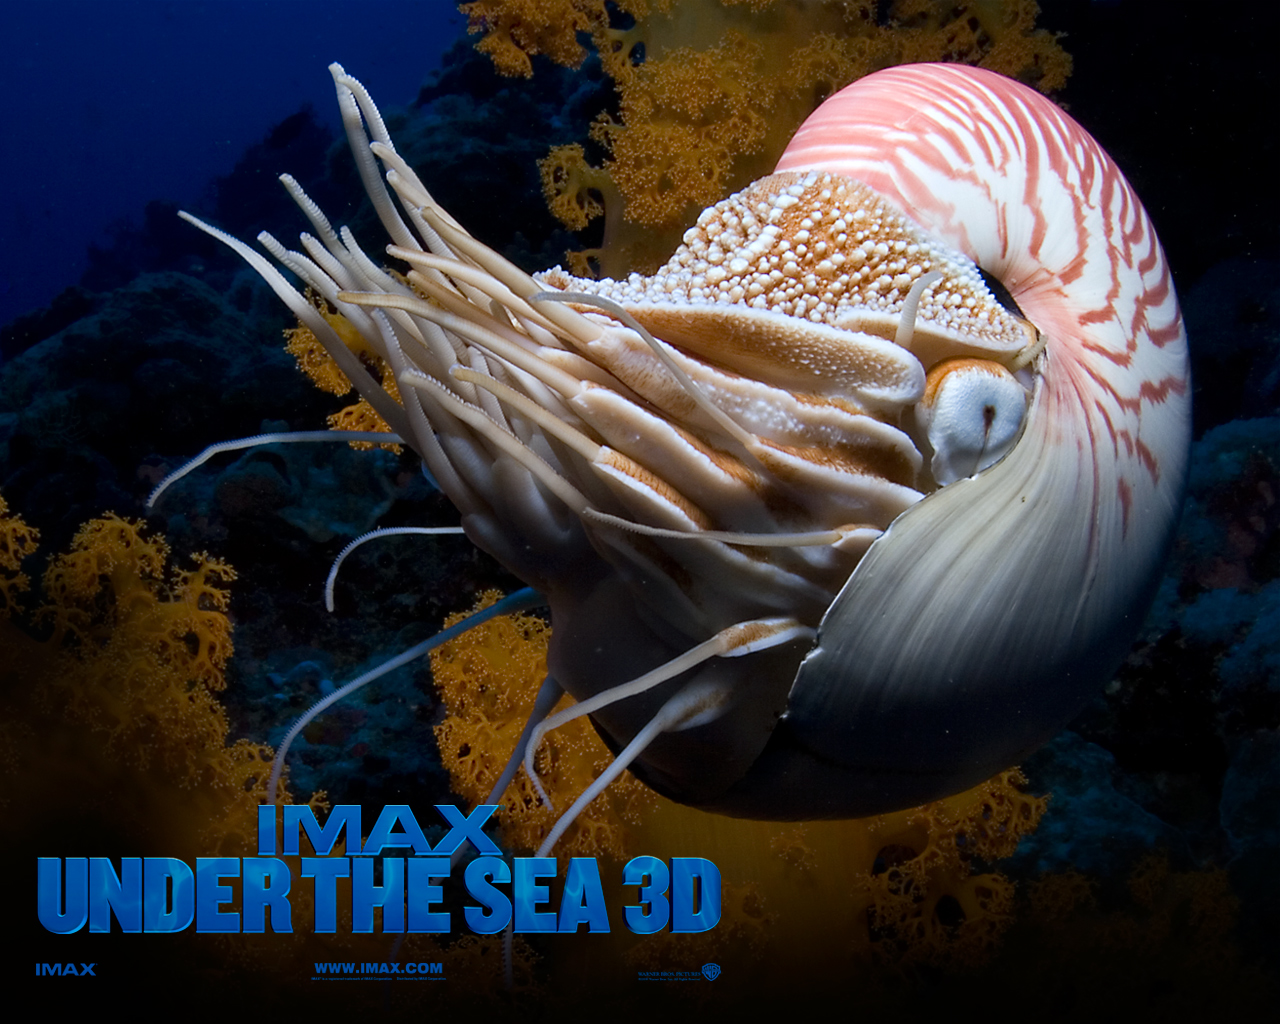 Under the Sea 3D movies